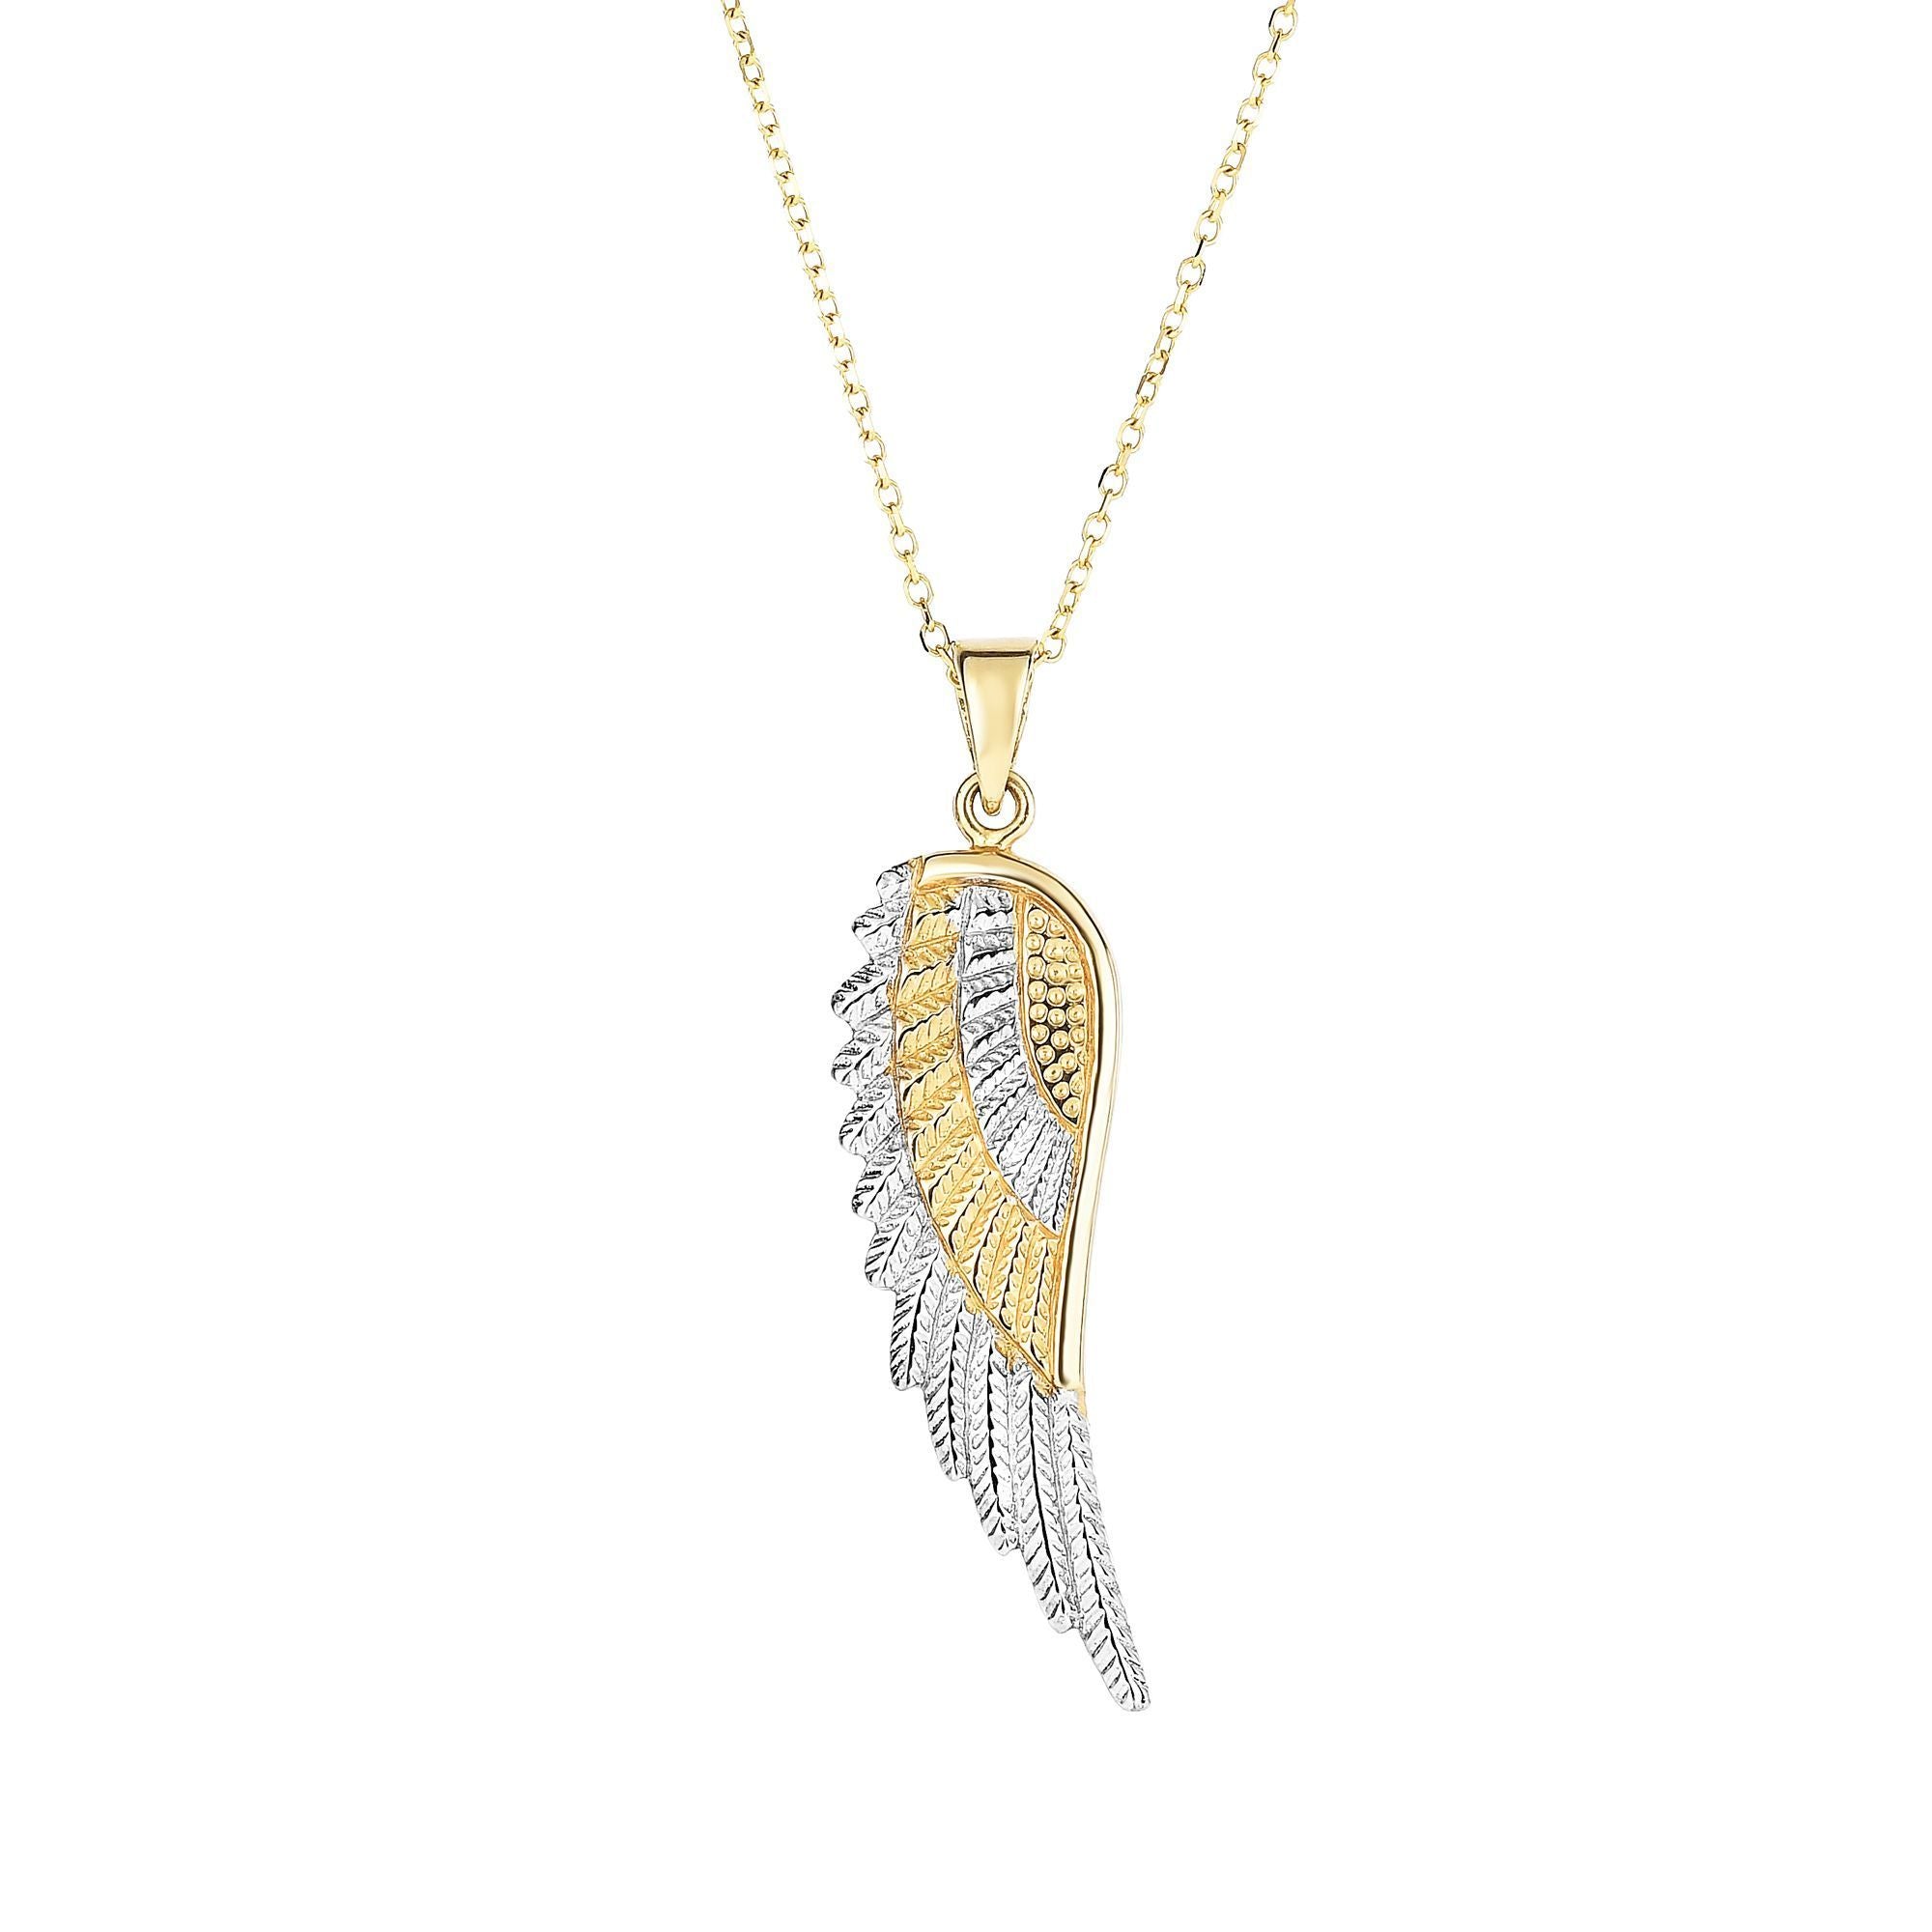 Minimalist Solid Gold Angel Wing Necklace - wingroupjewelry